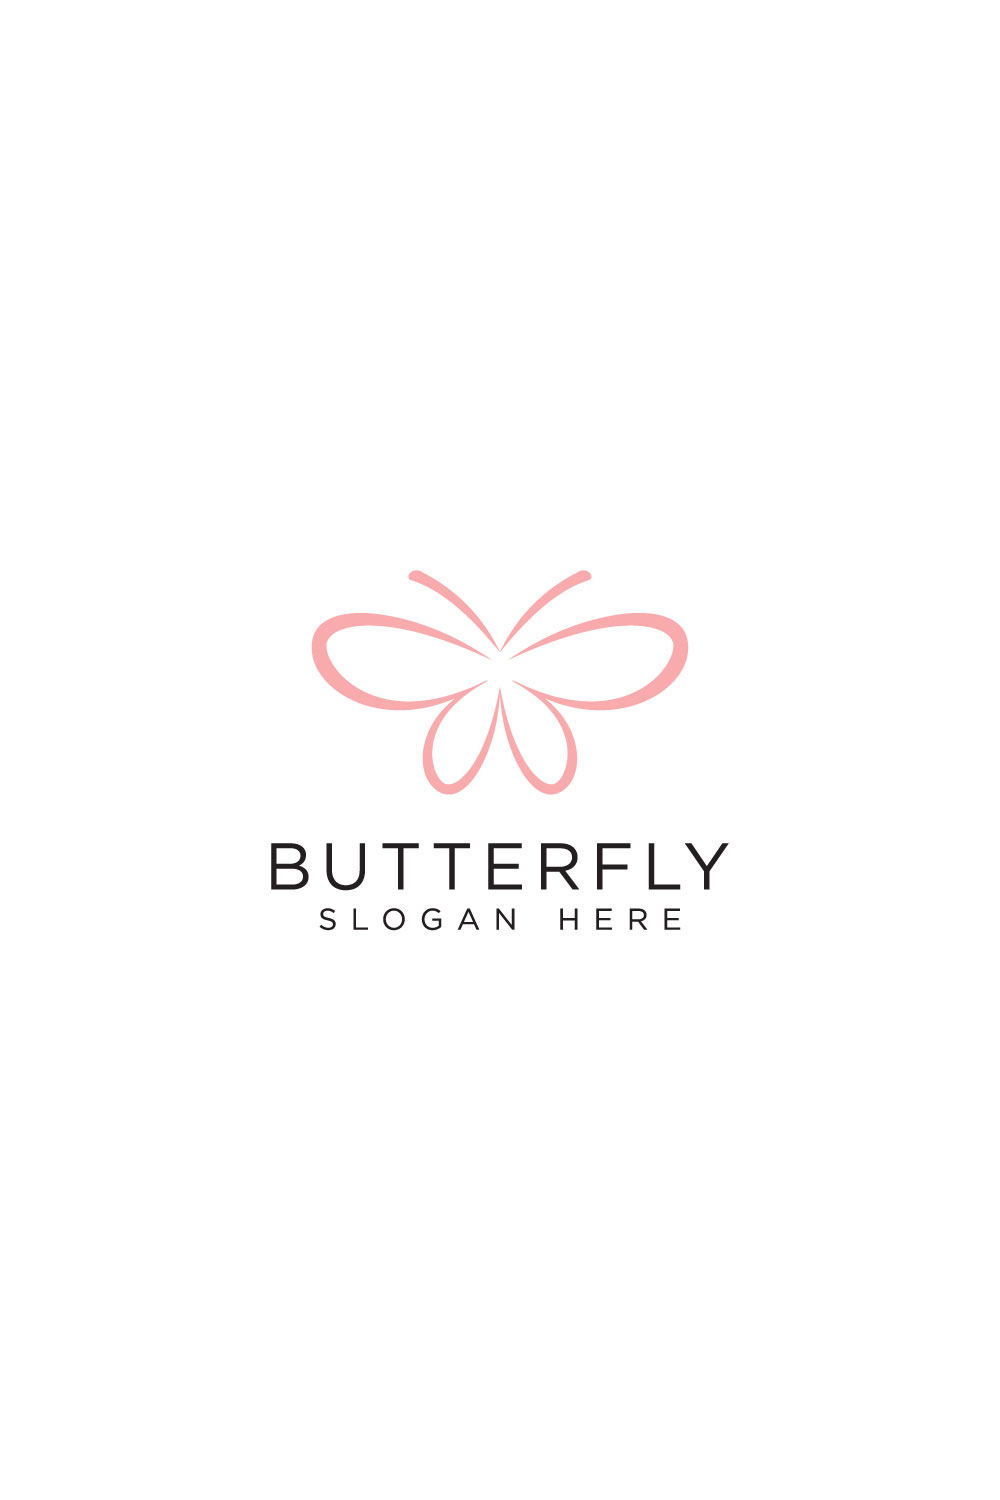 butterfly animal logo design vector pinterest preview image.